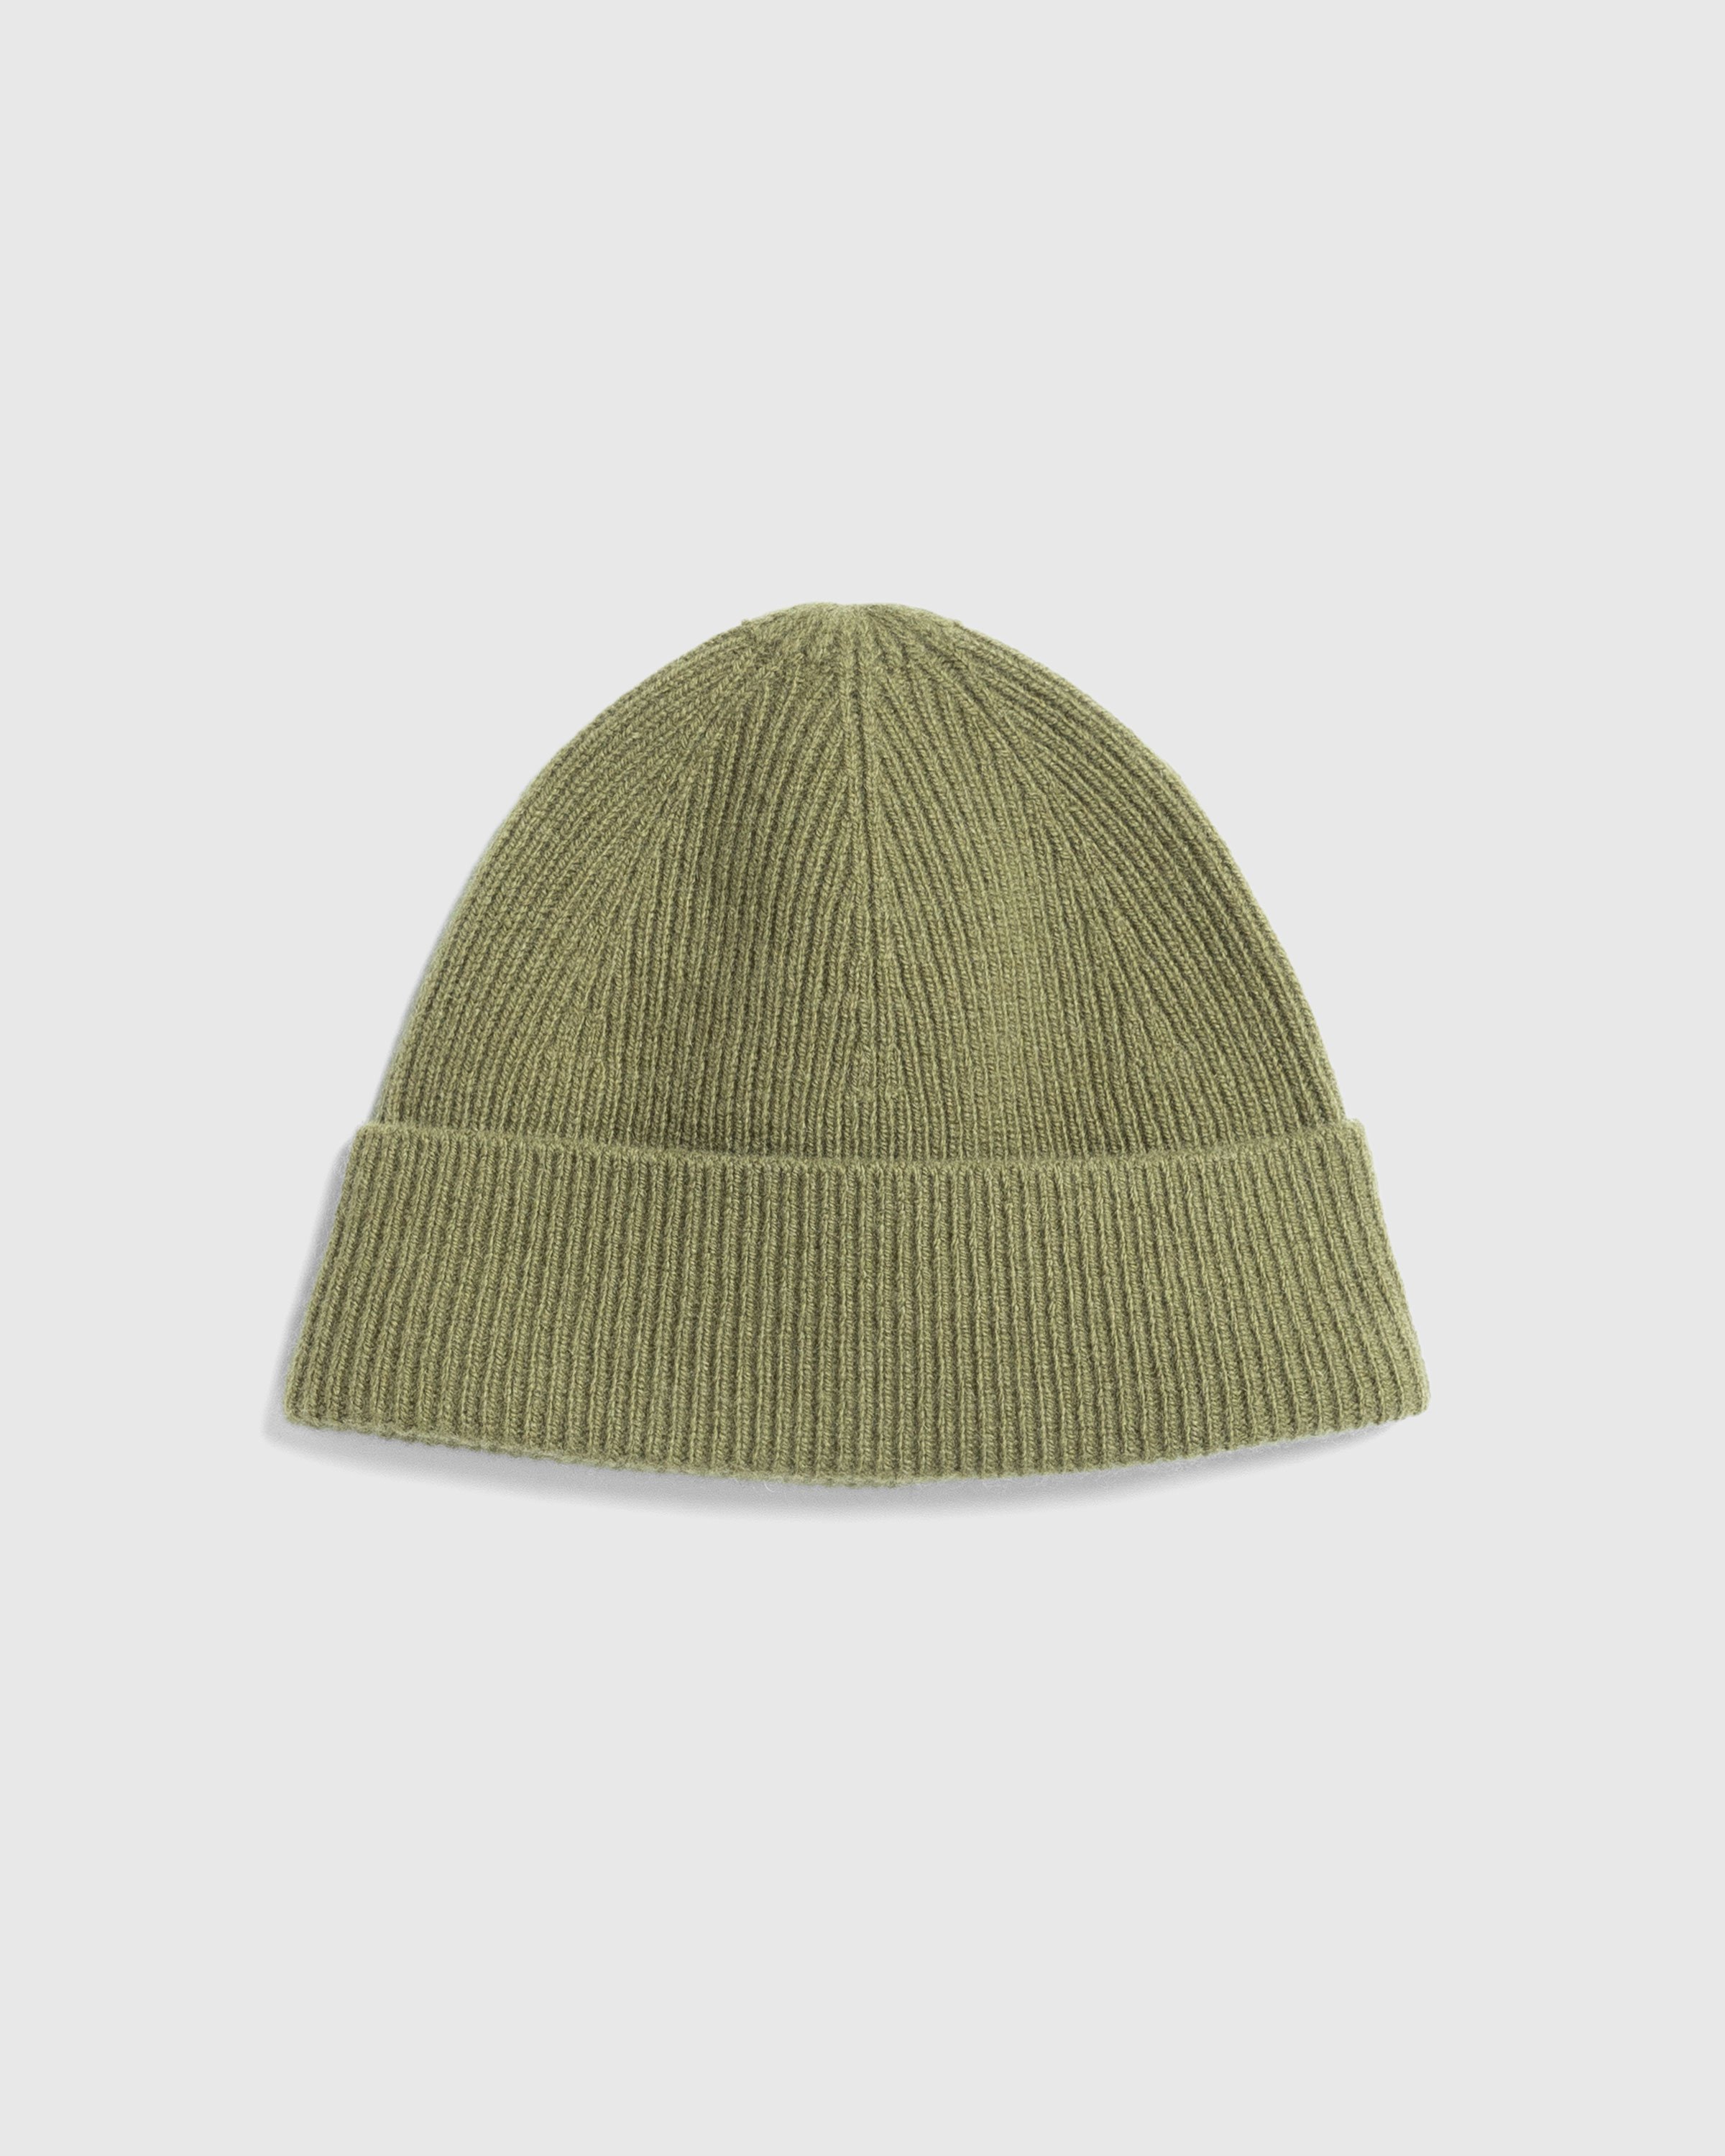 Acne Studios - FN-UX-HATS000187 Olive Green - Accessories - Green - Image 1